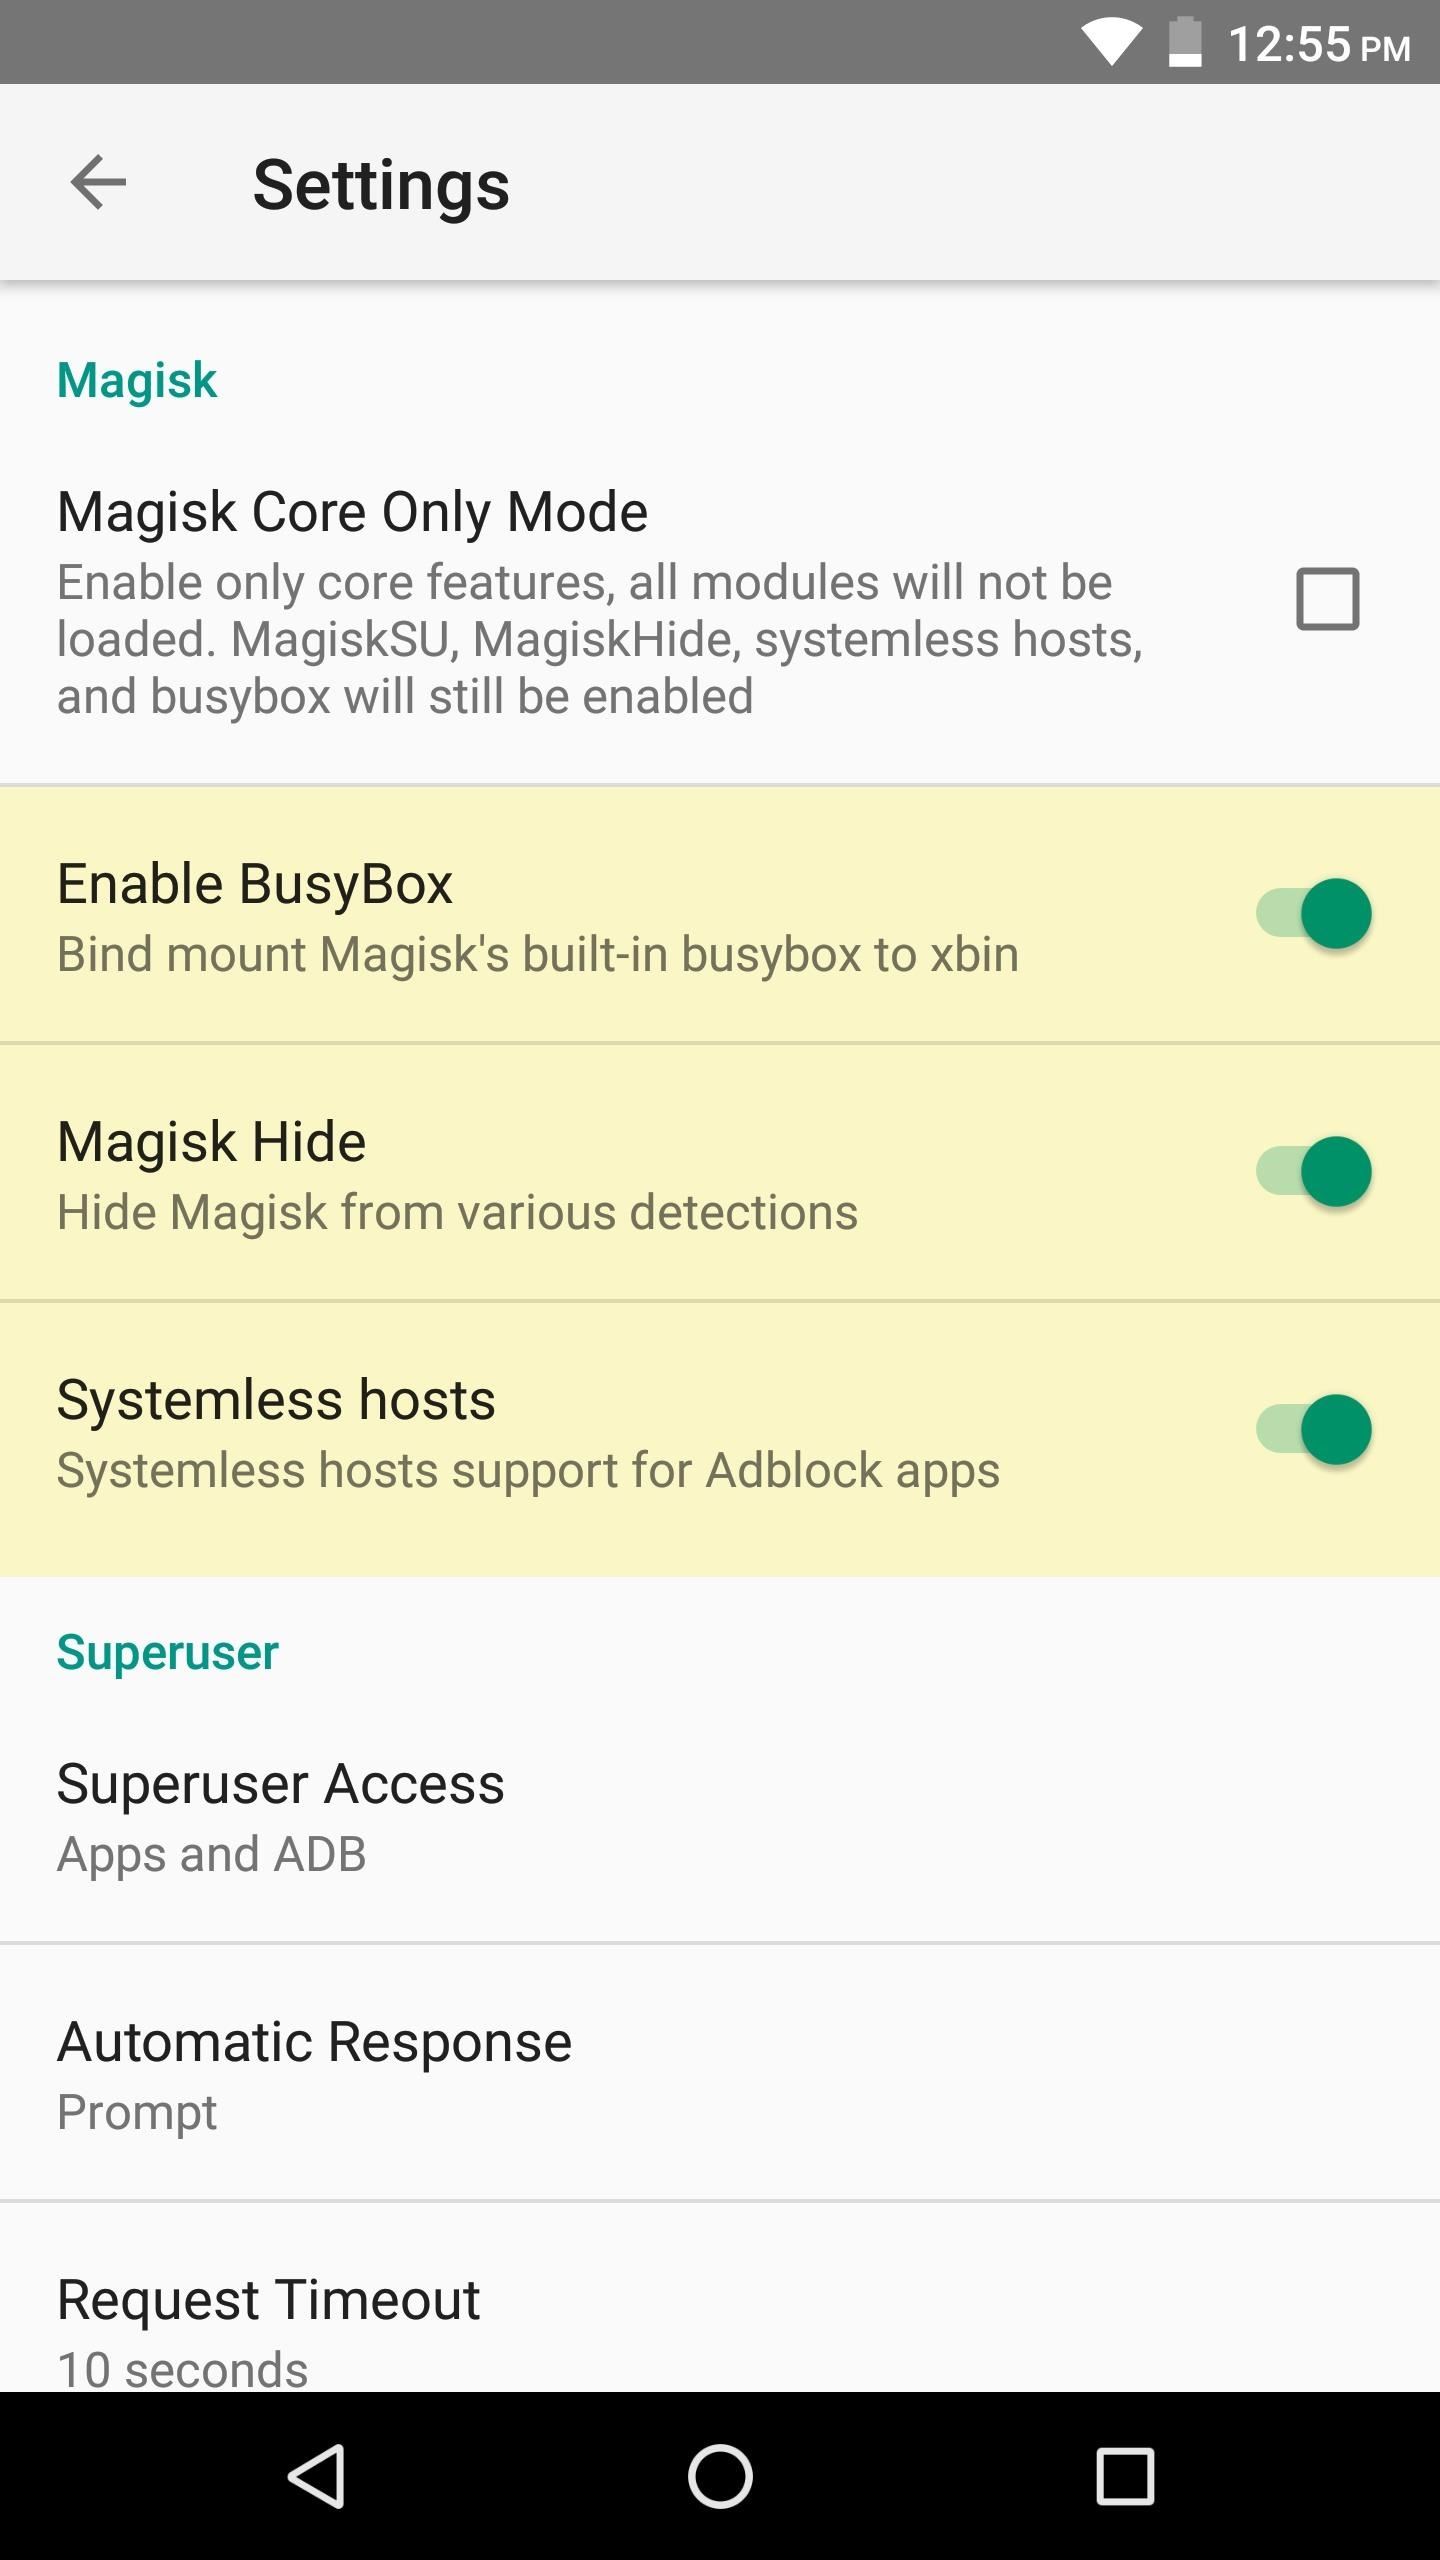 Magisk 101: How to Switch from SuperSU to Magisk & Pass SafetyNet